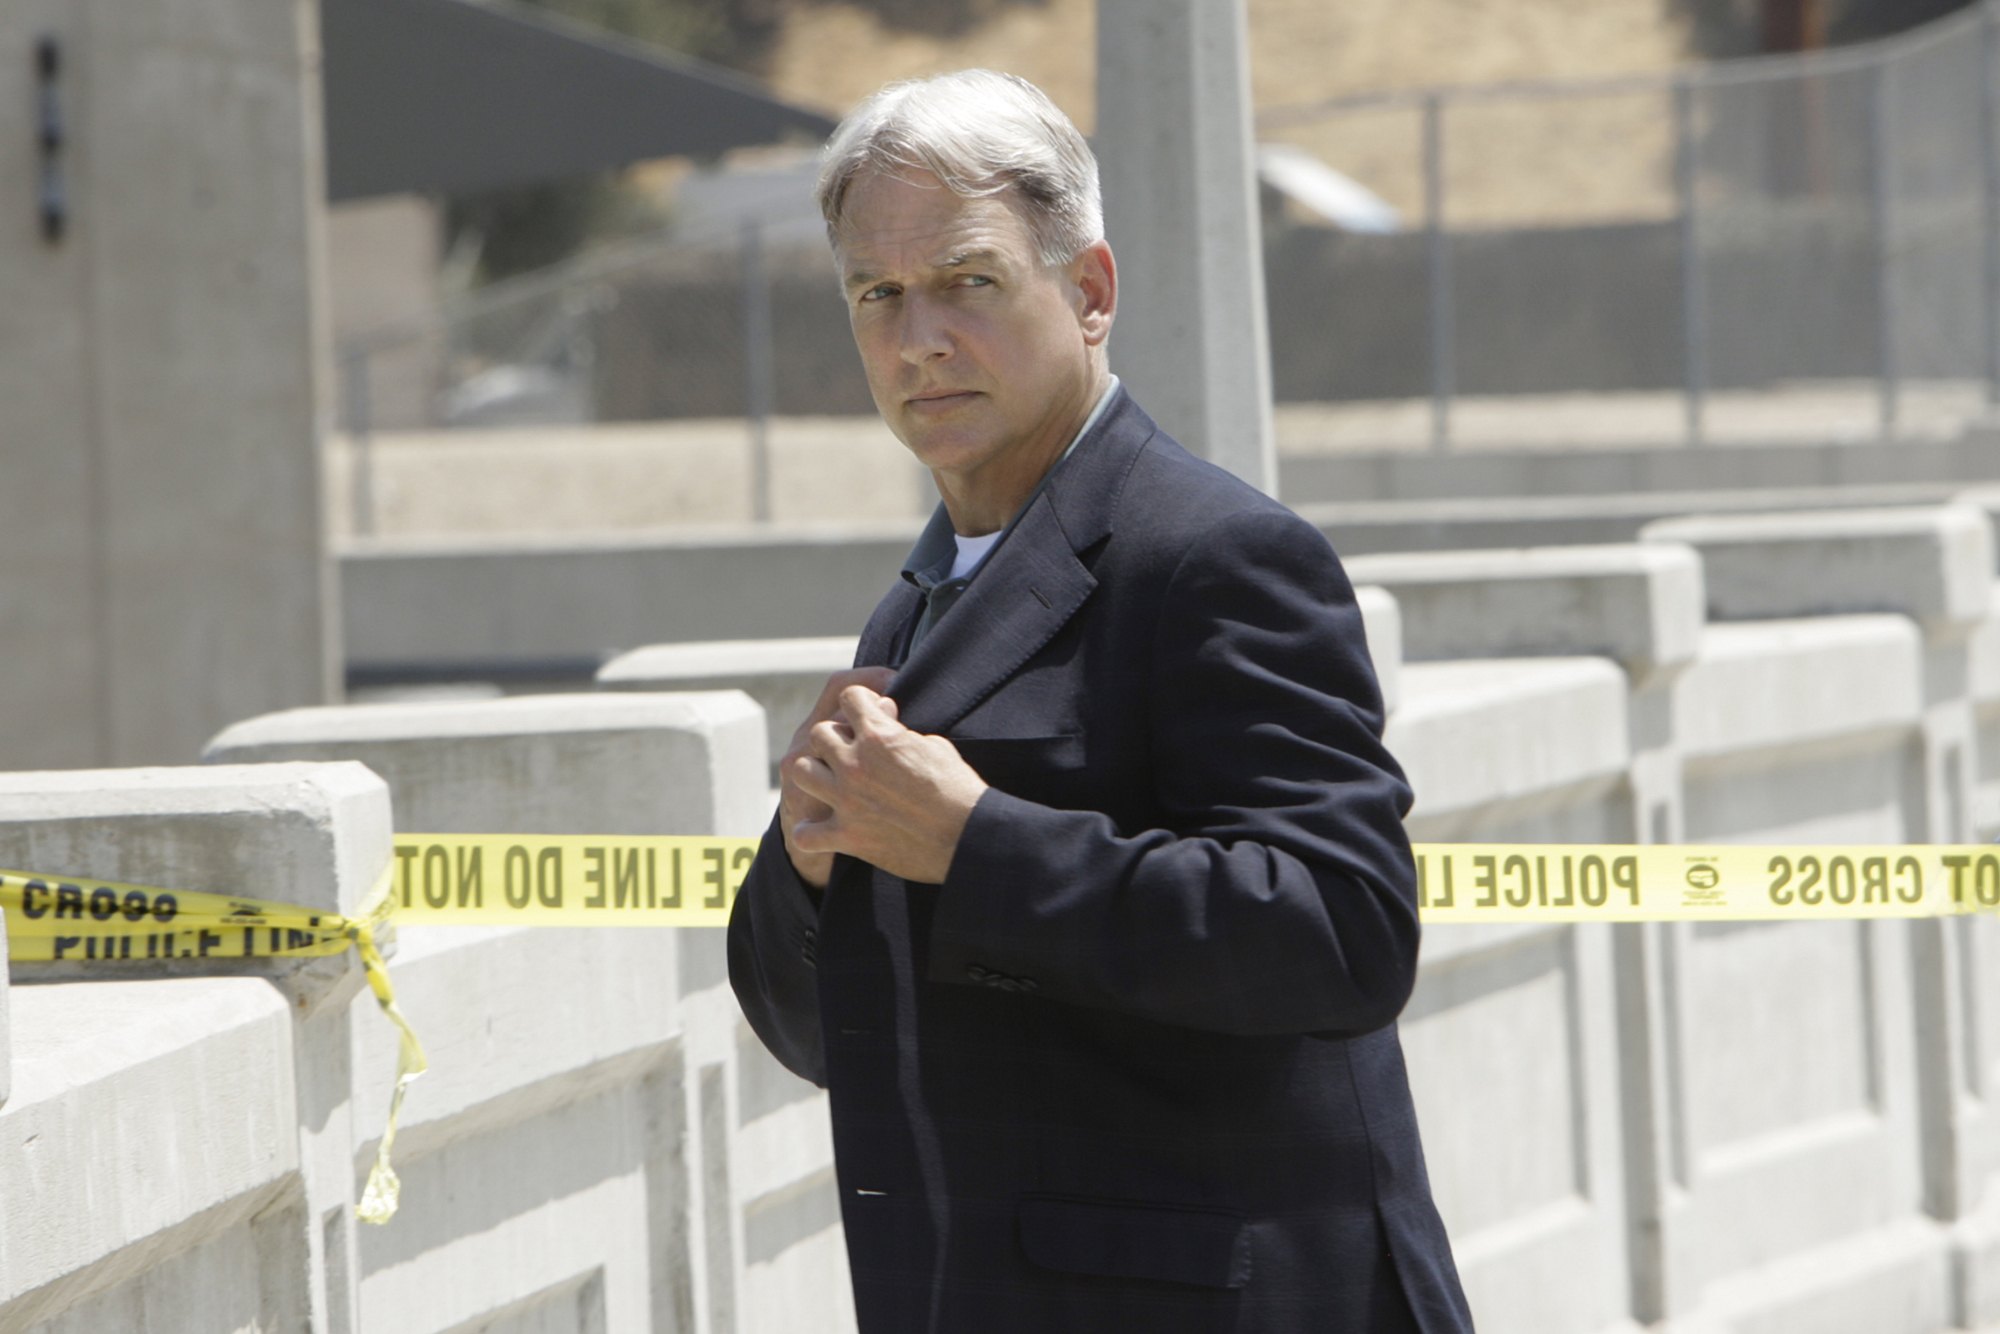 Mark Harmon on "NCIS: Los Angeles" August 11, 2009 | Source: Getty Images